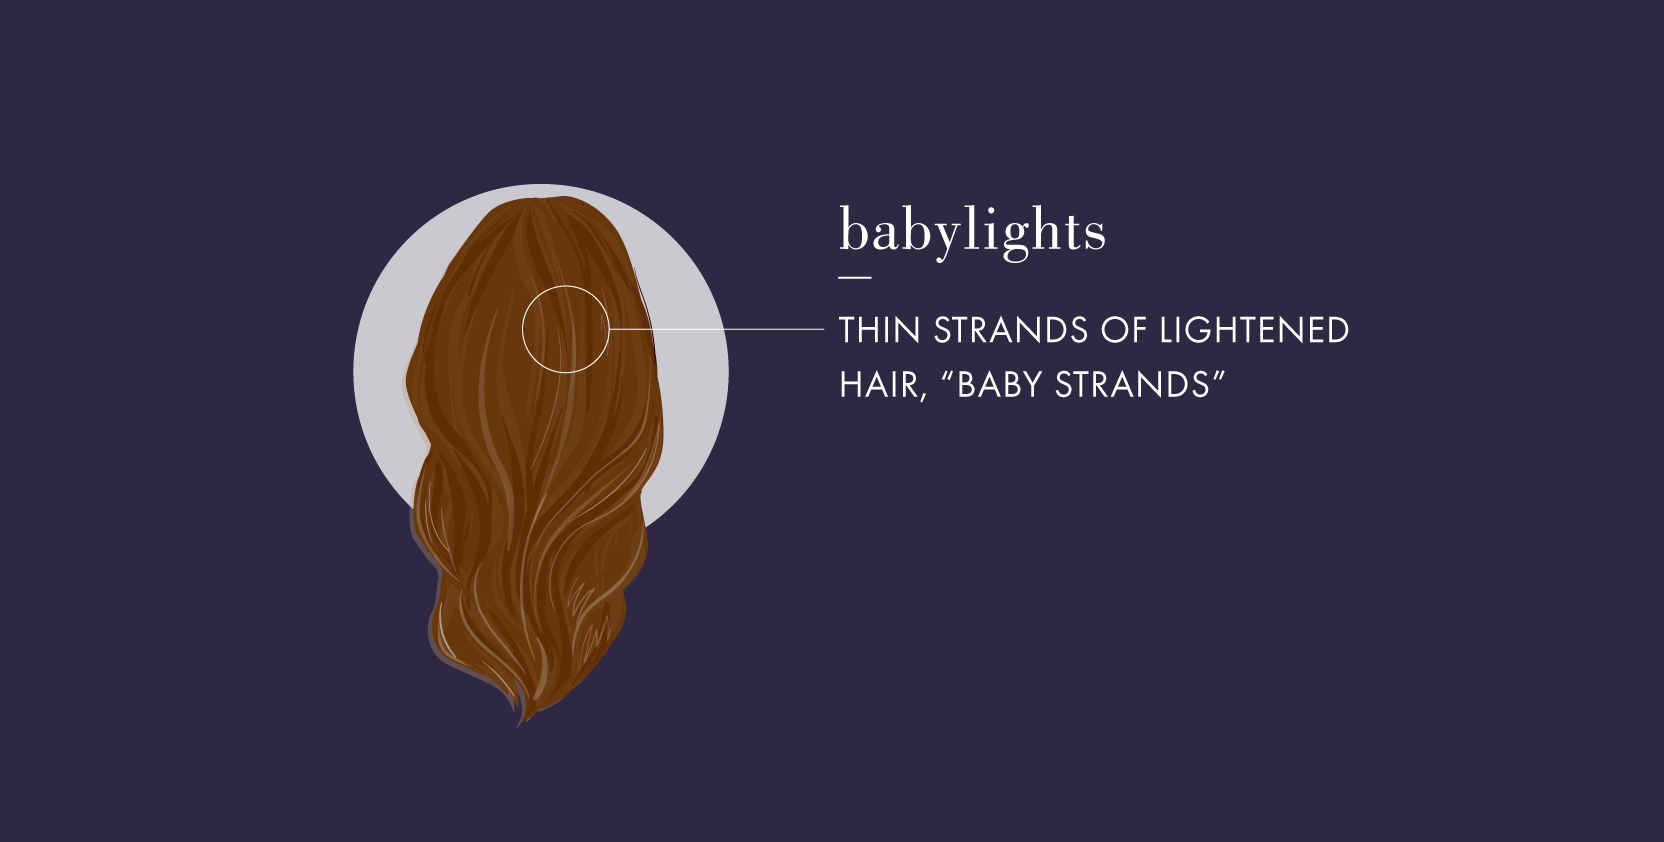 What Are Babylights? Everything You Need to Know | John Frieda